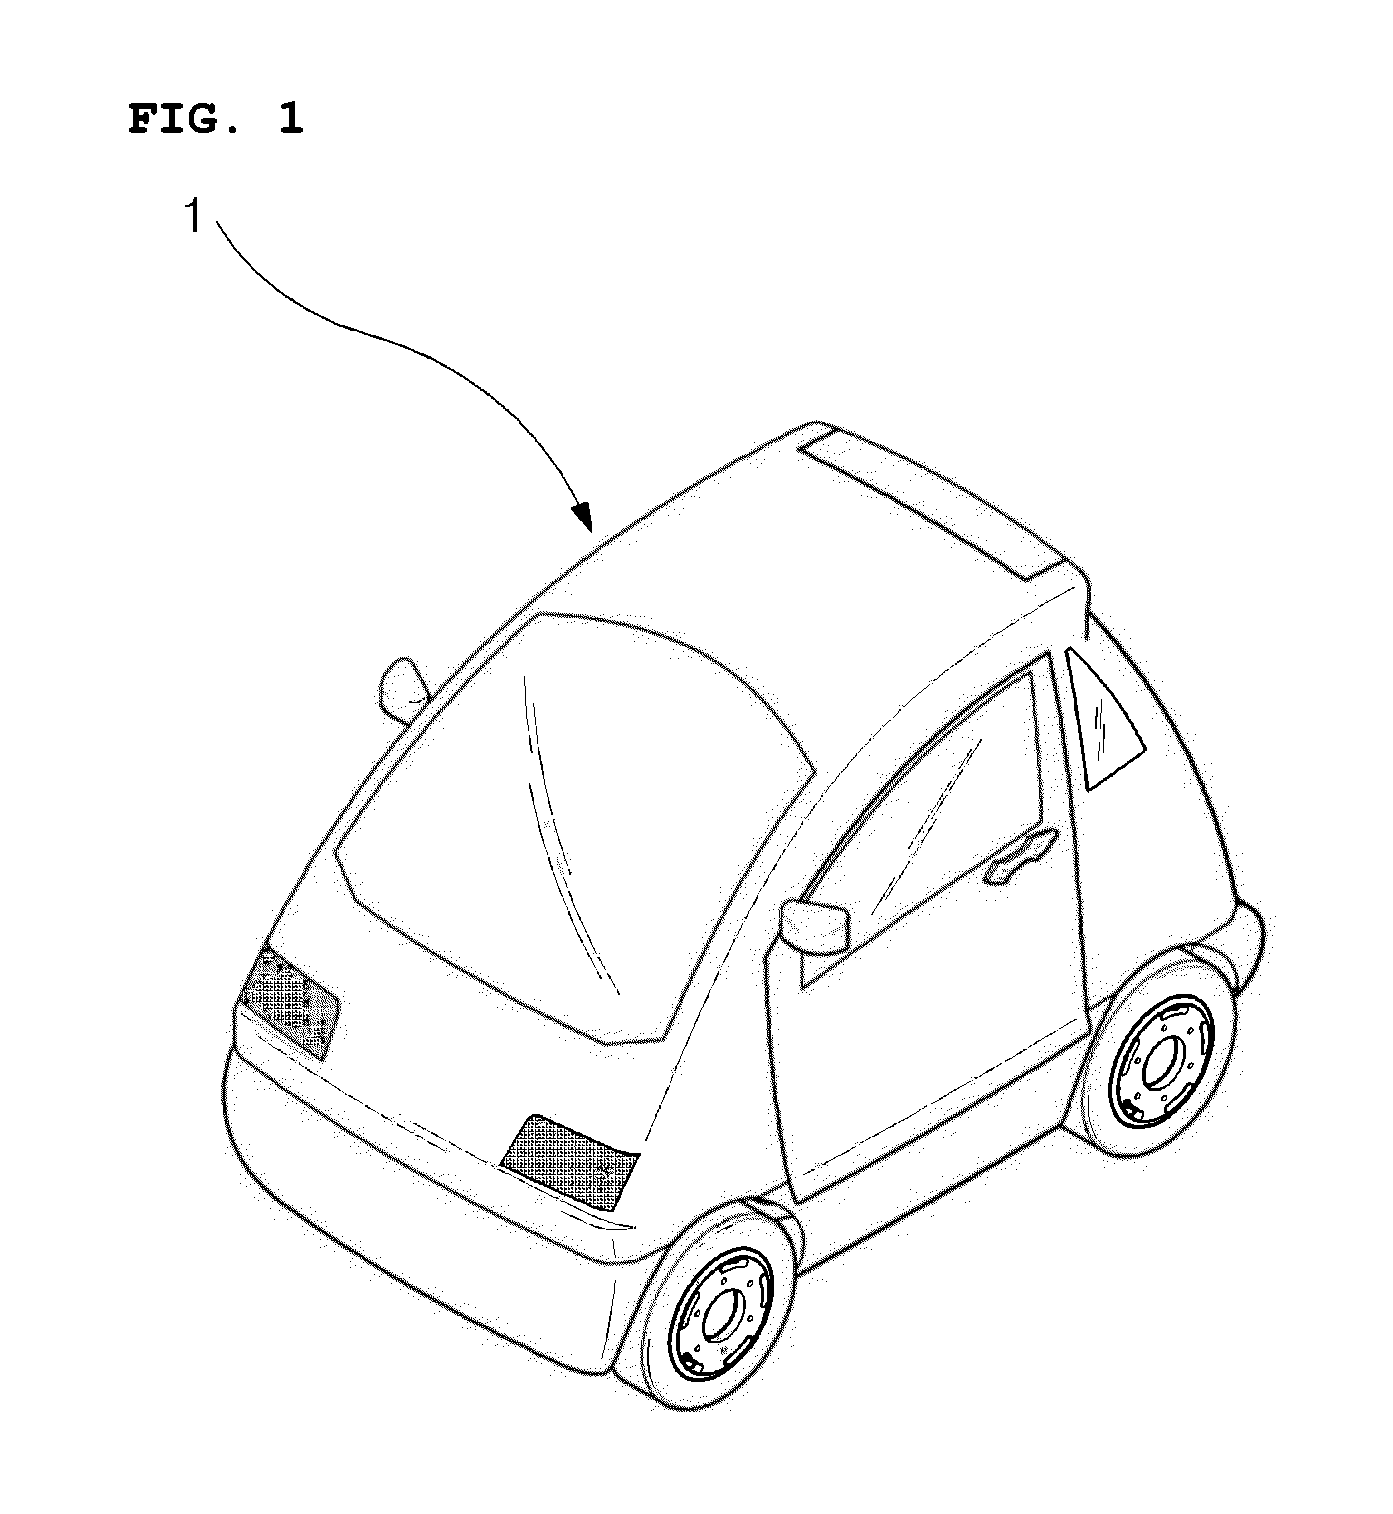 Chassis frame assembly structure for electrical vehicle for disabled person